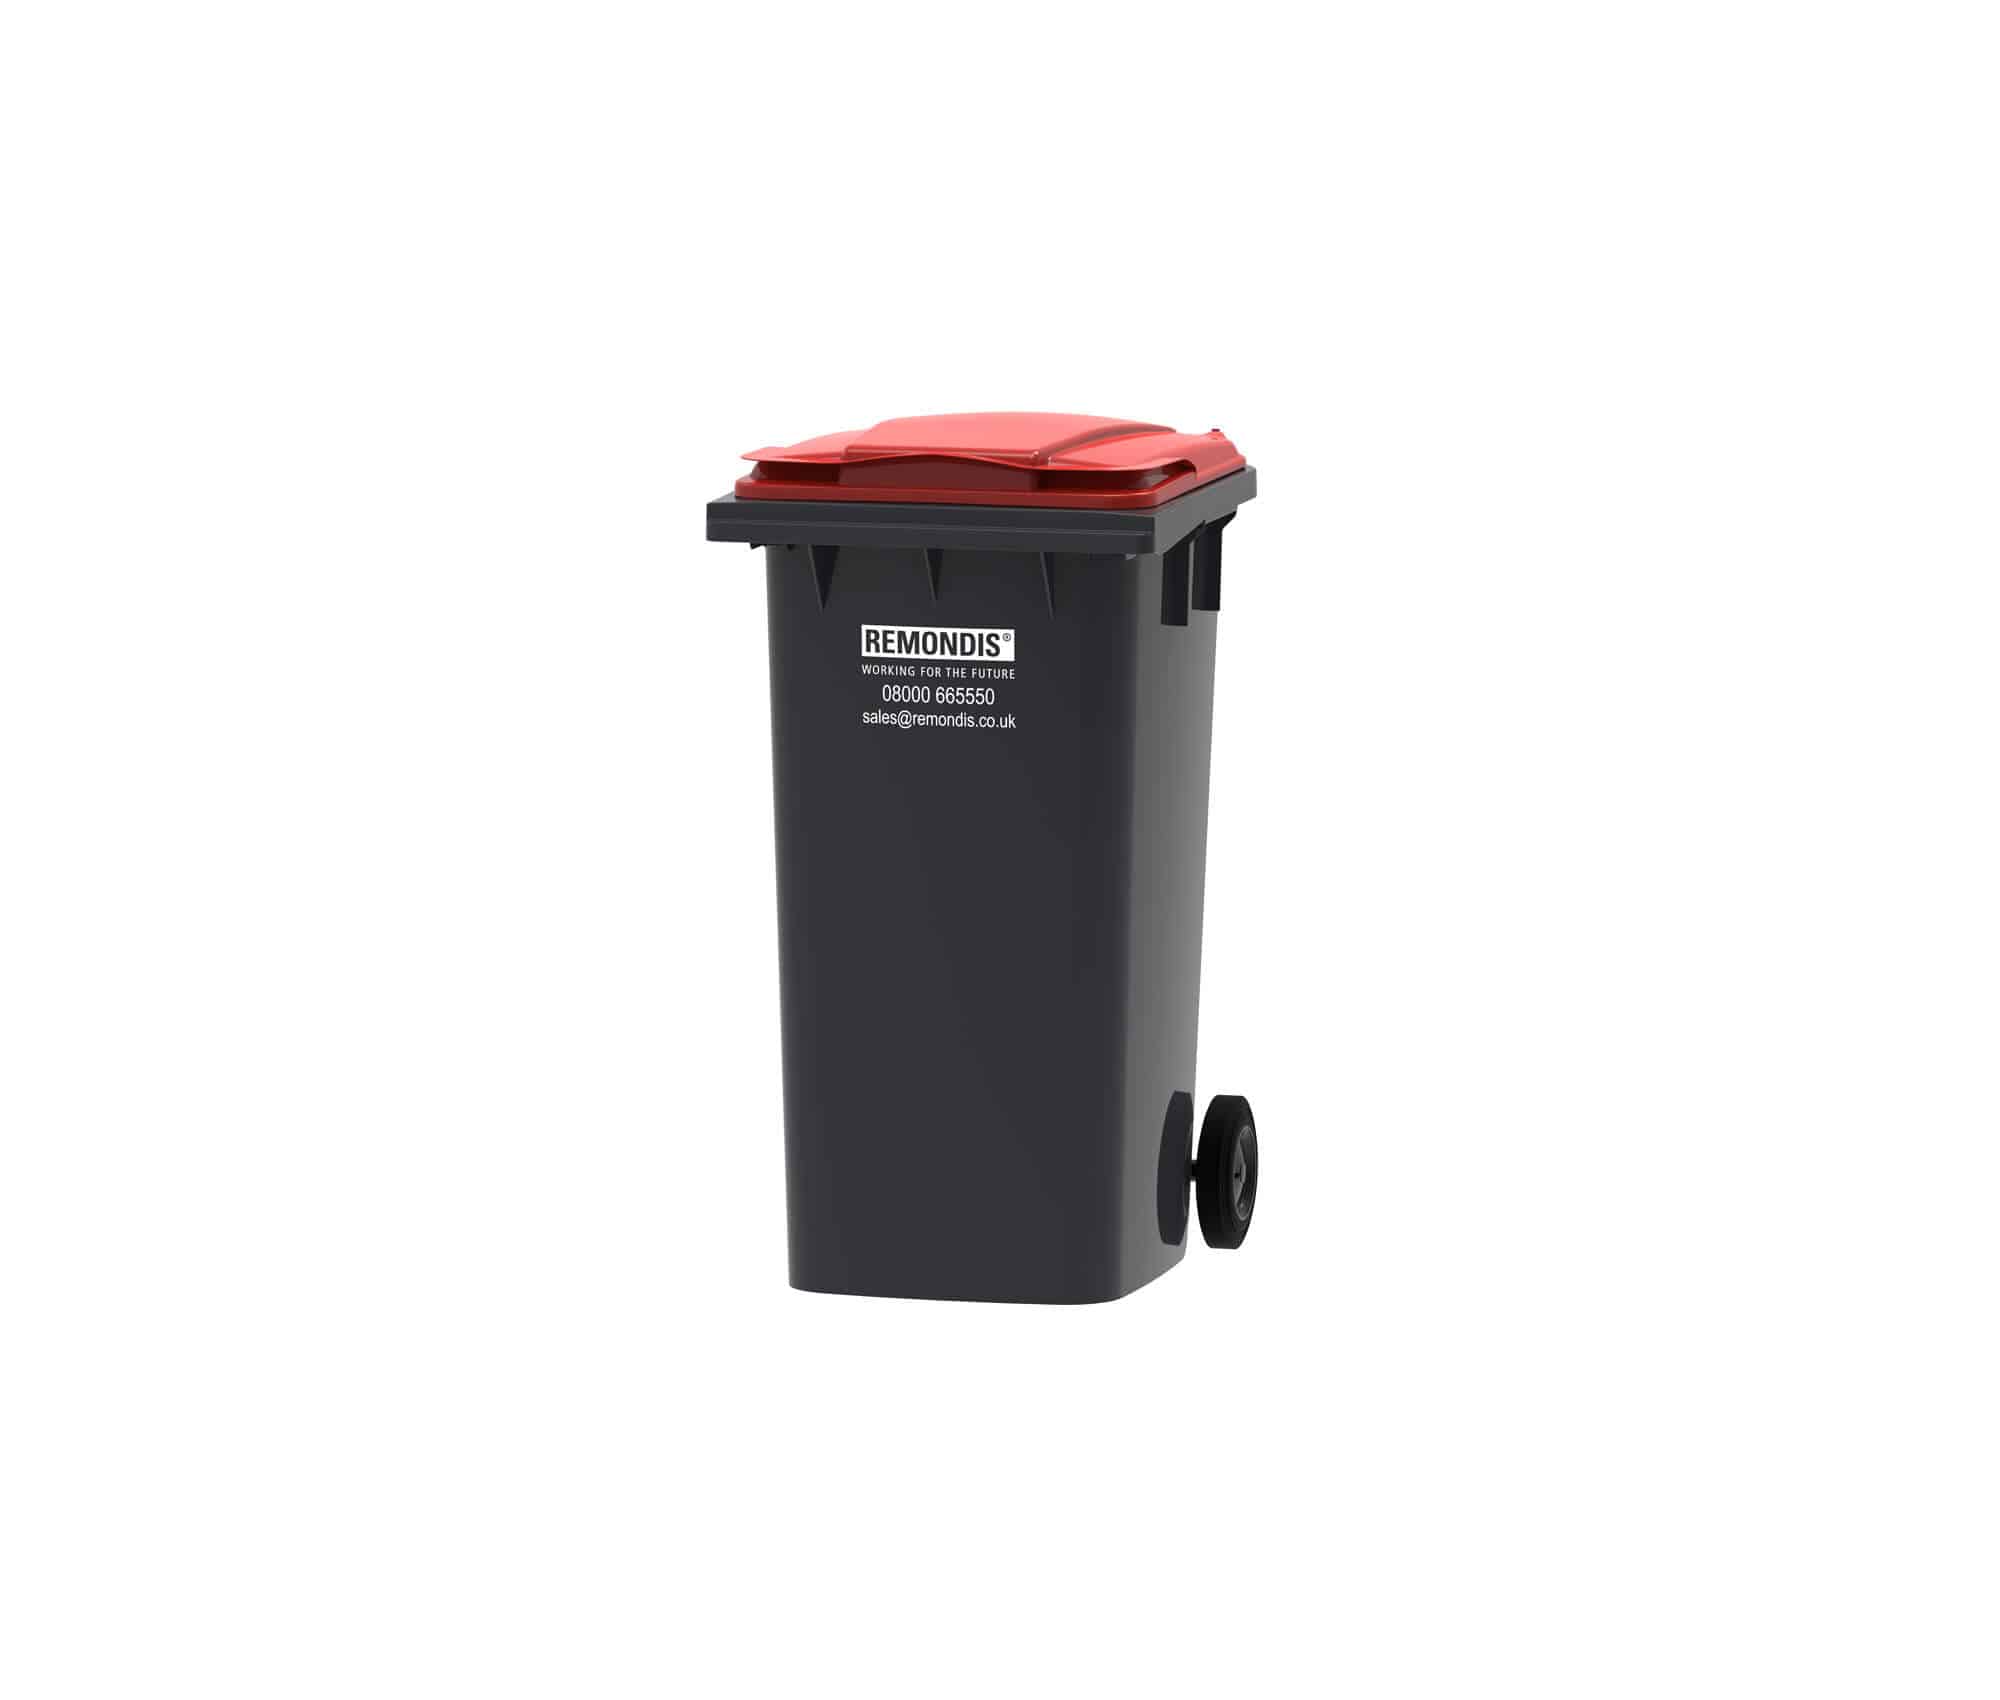 REMONDIS Trade Waste Container